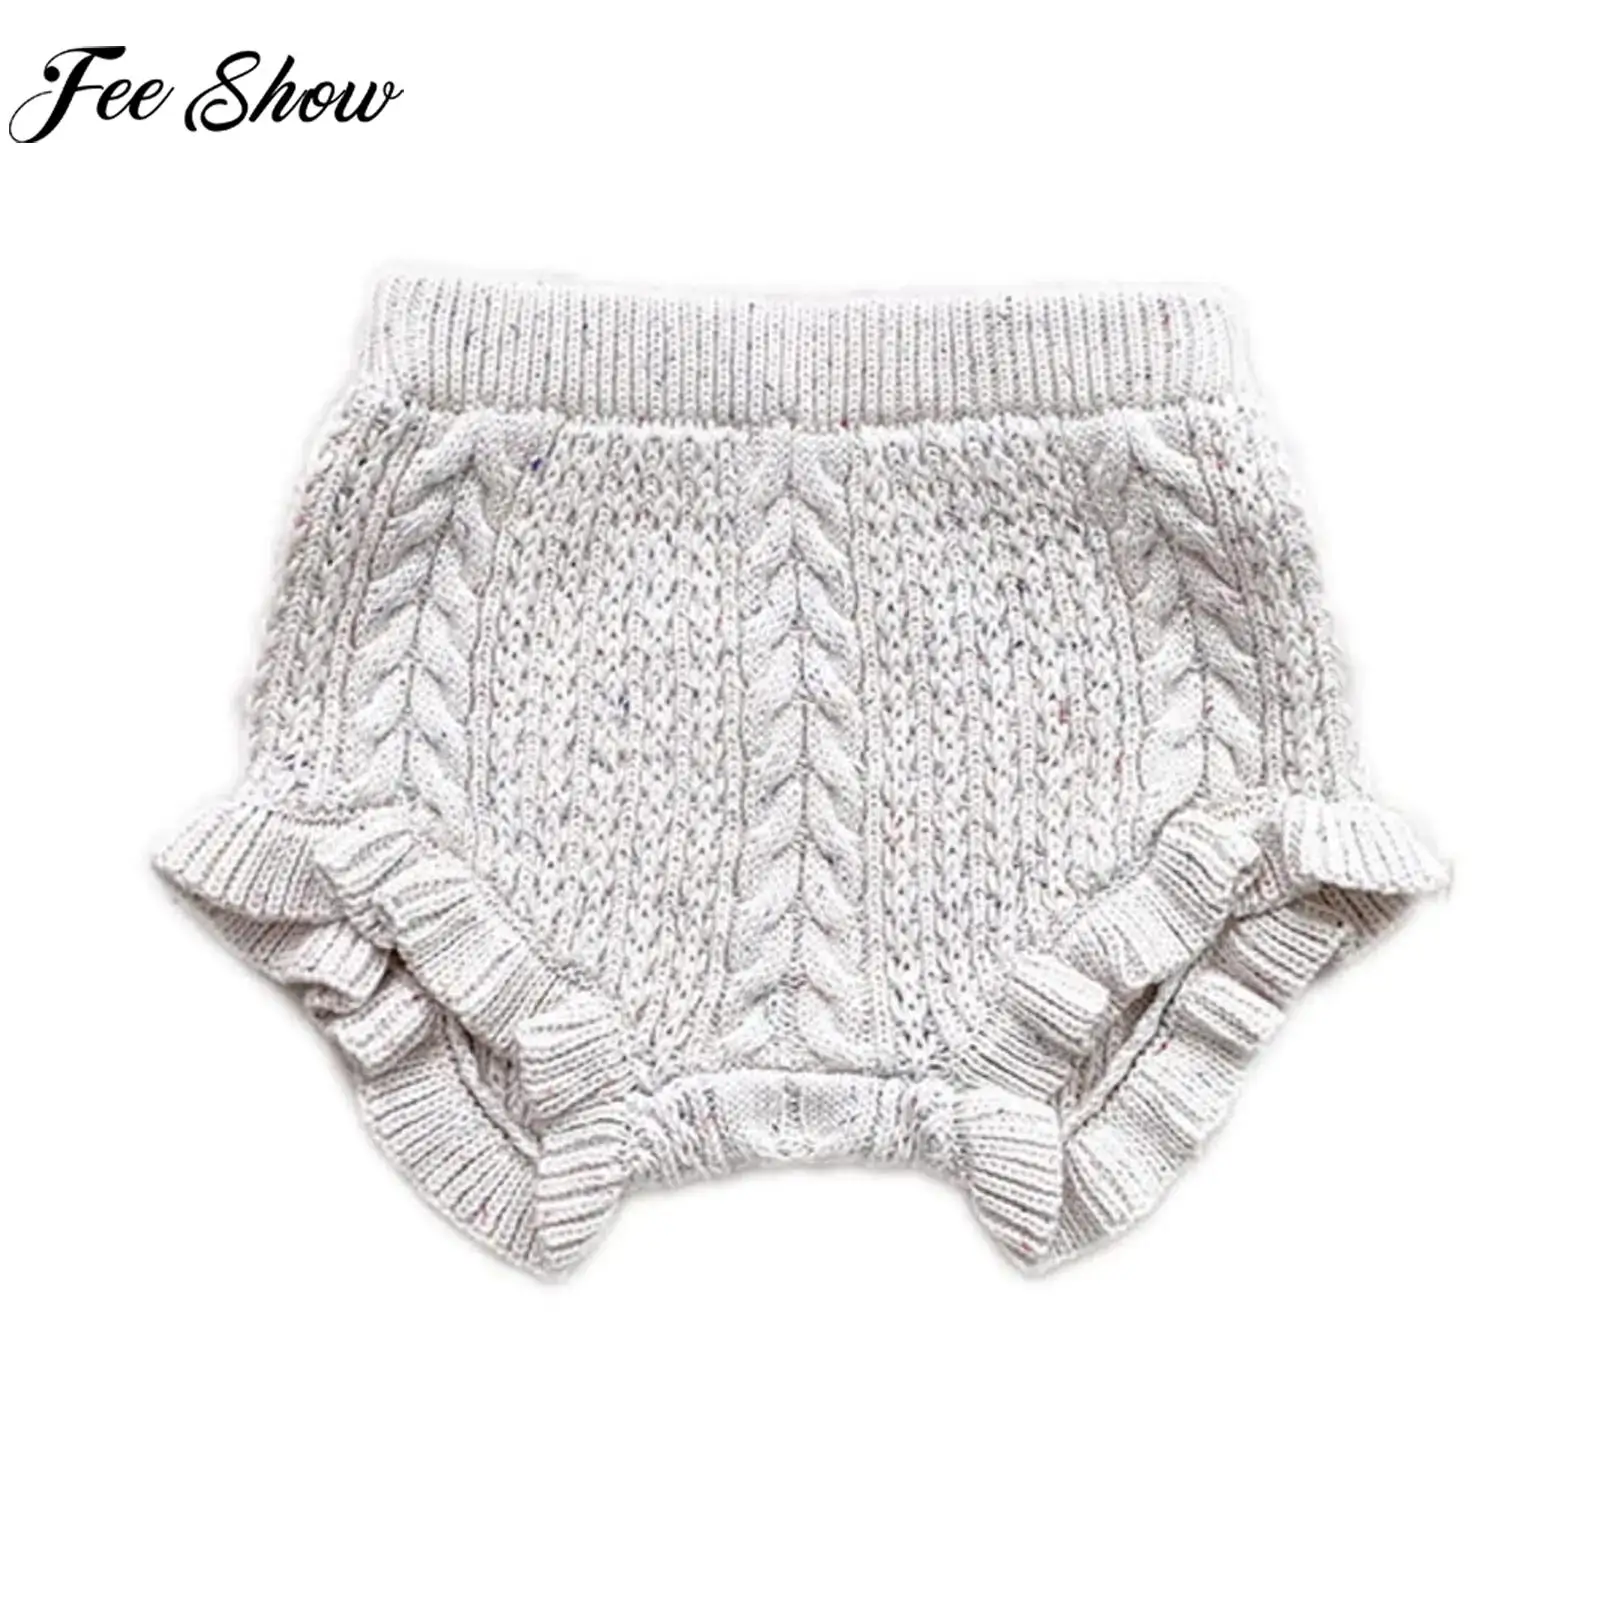 

Infant Boys Girls Casual Cotton Knit Bloomers Stretchable Ruffles Shorts Diaper Covers Underwear Panties Daily Wear Loungewear